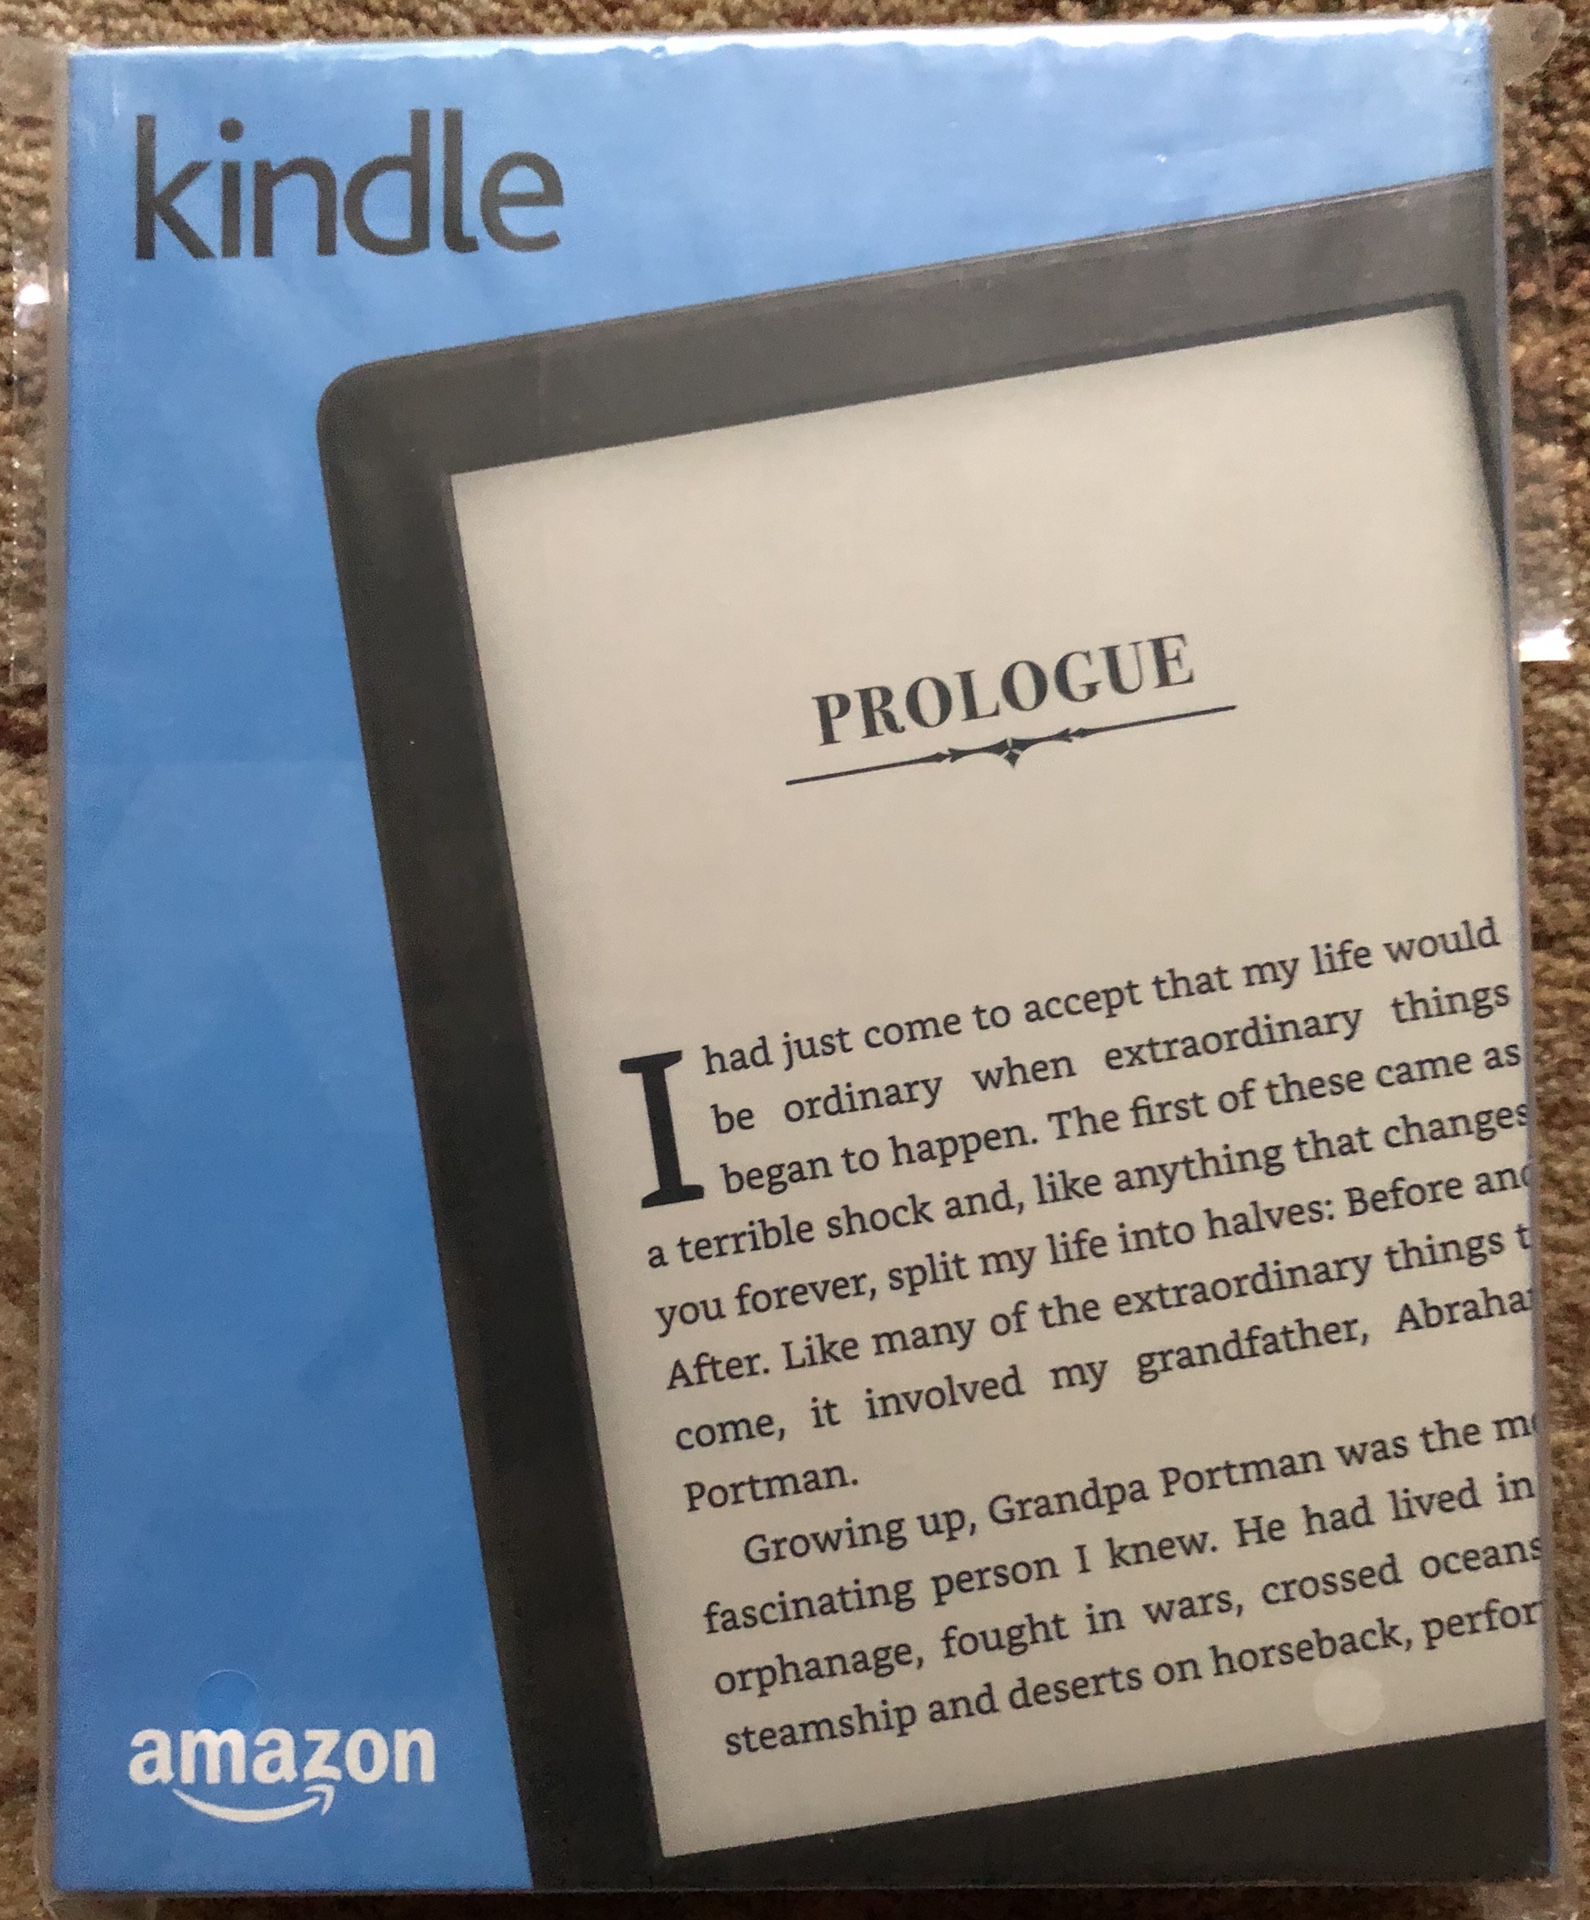 New kindle with original case